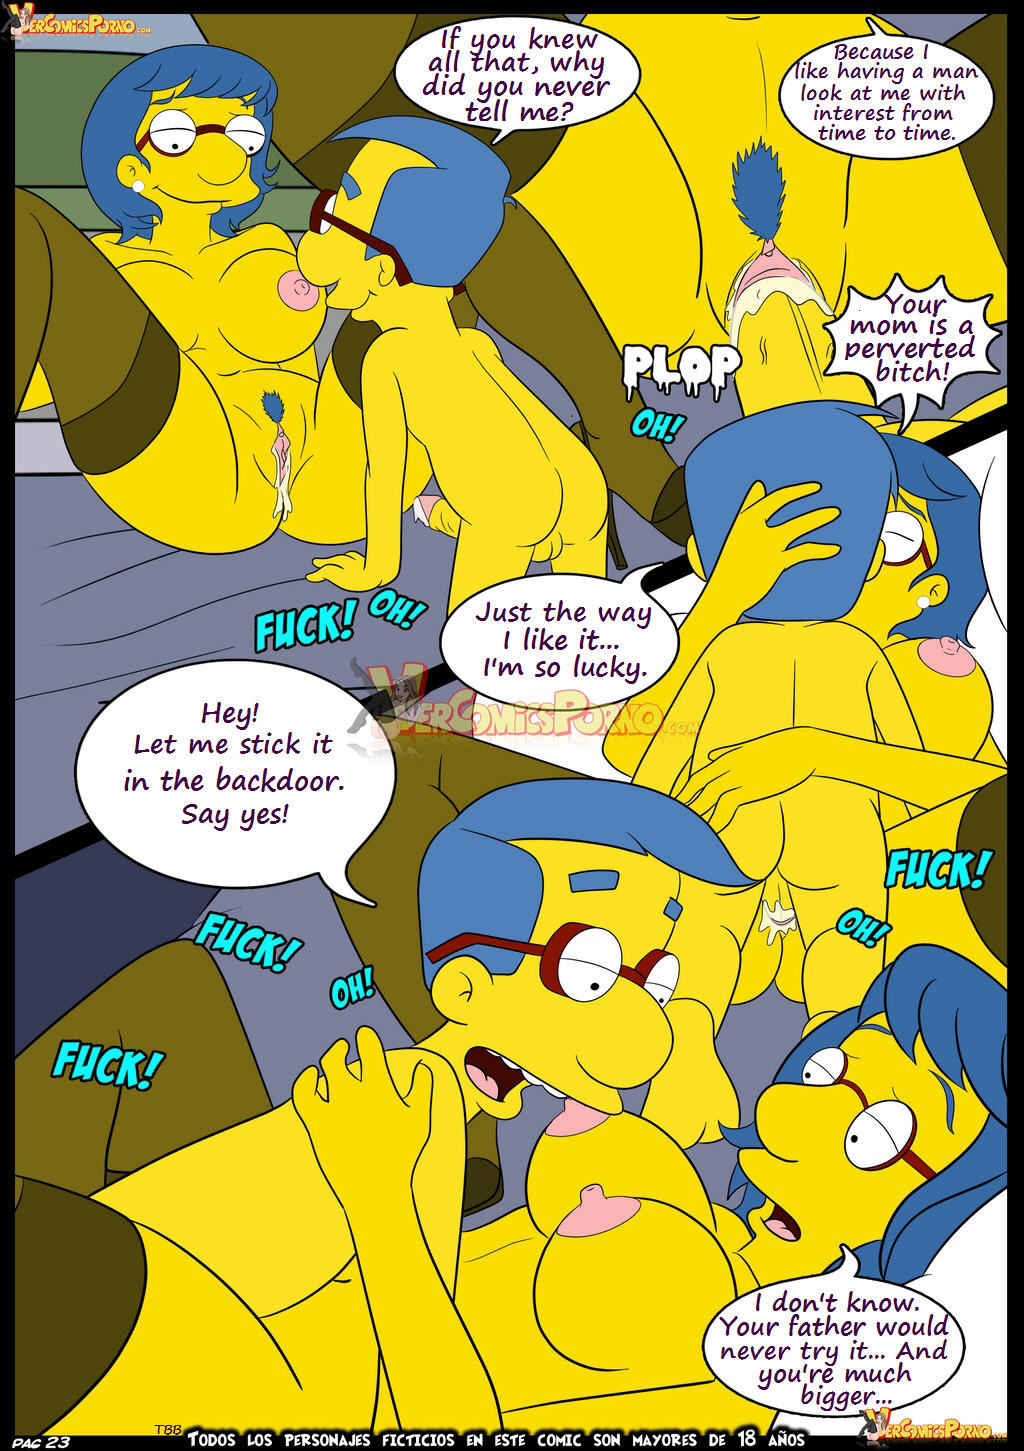 Croc,The Simpsons Learning with Mom-English page 23